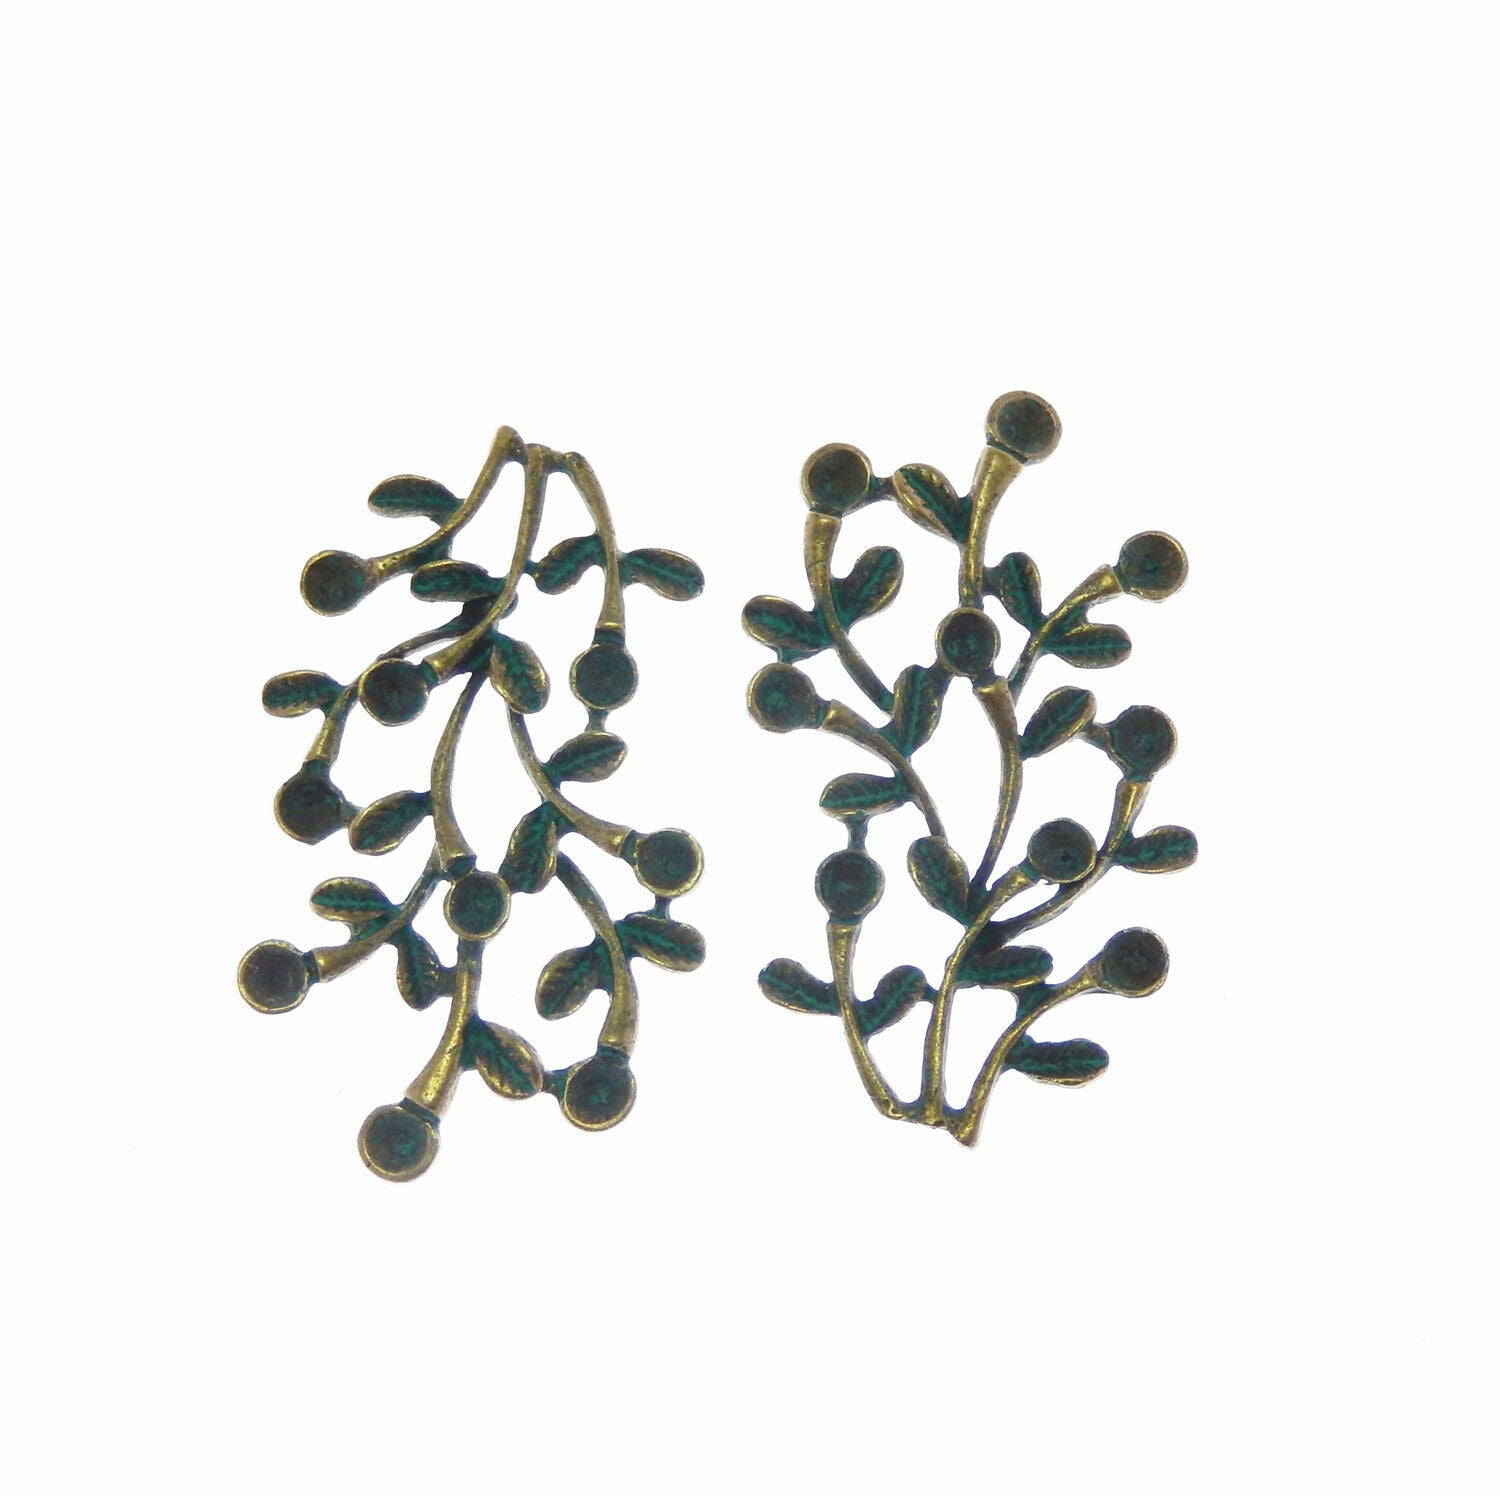 10 pcs Antiqued Copper Green Ivy Vine Look Charms Pendant Crafts 58x35mm 52295